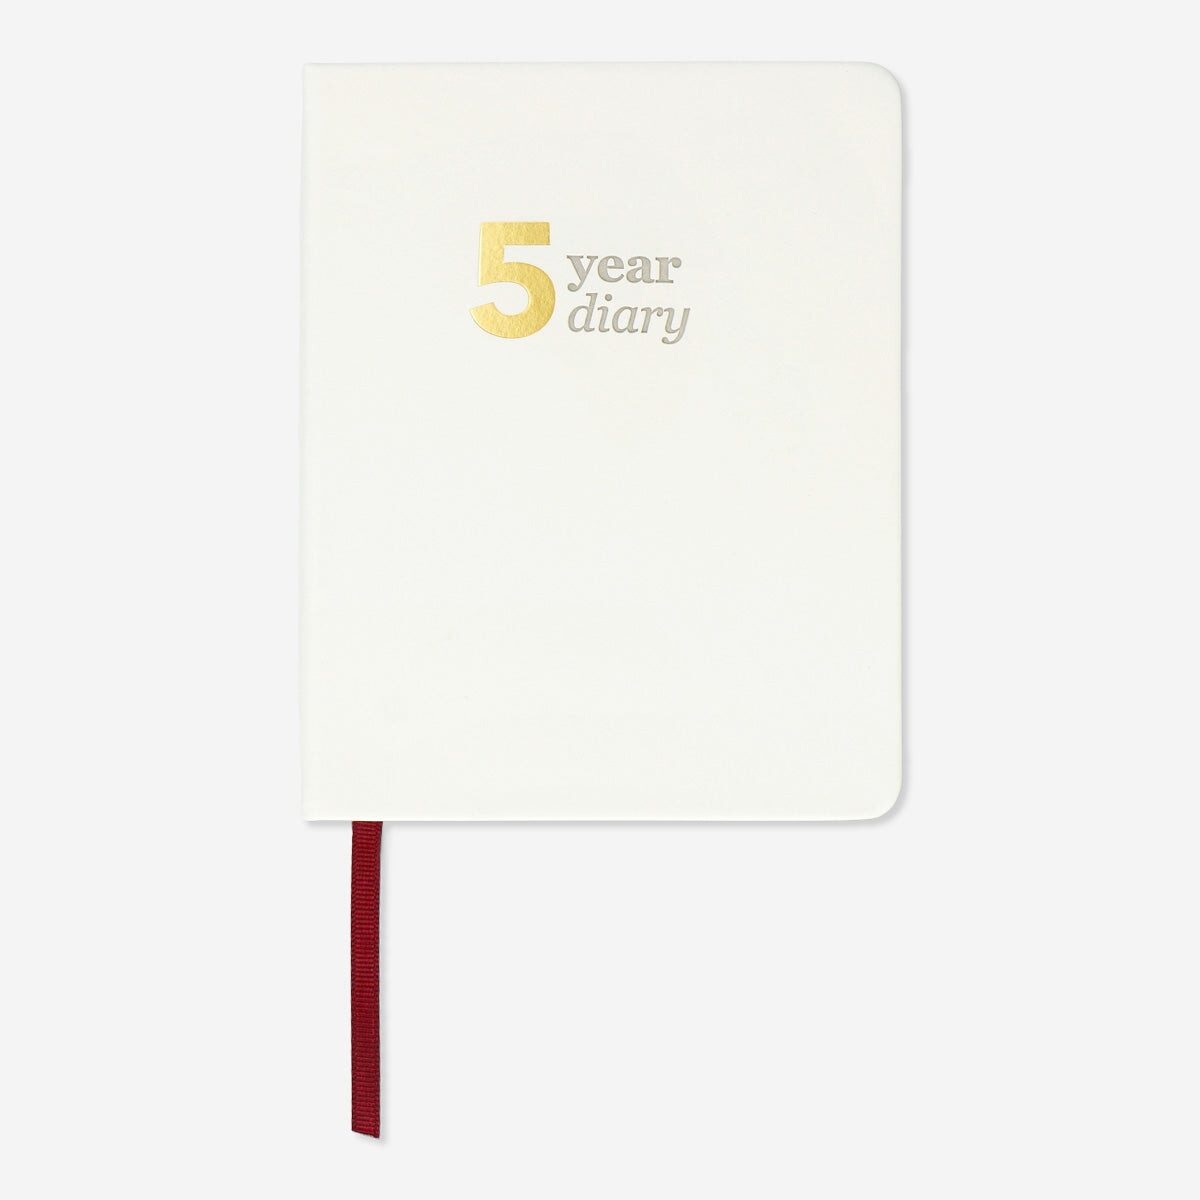 Image of Five-year diary